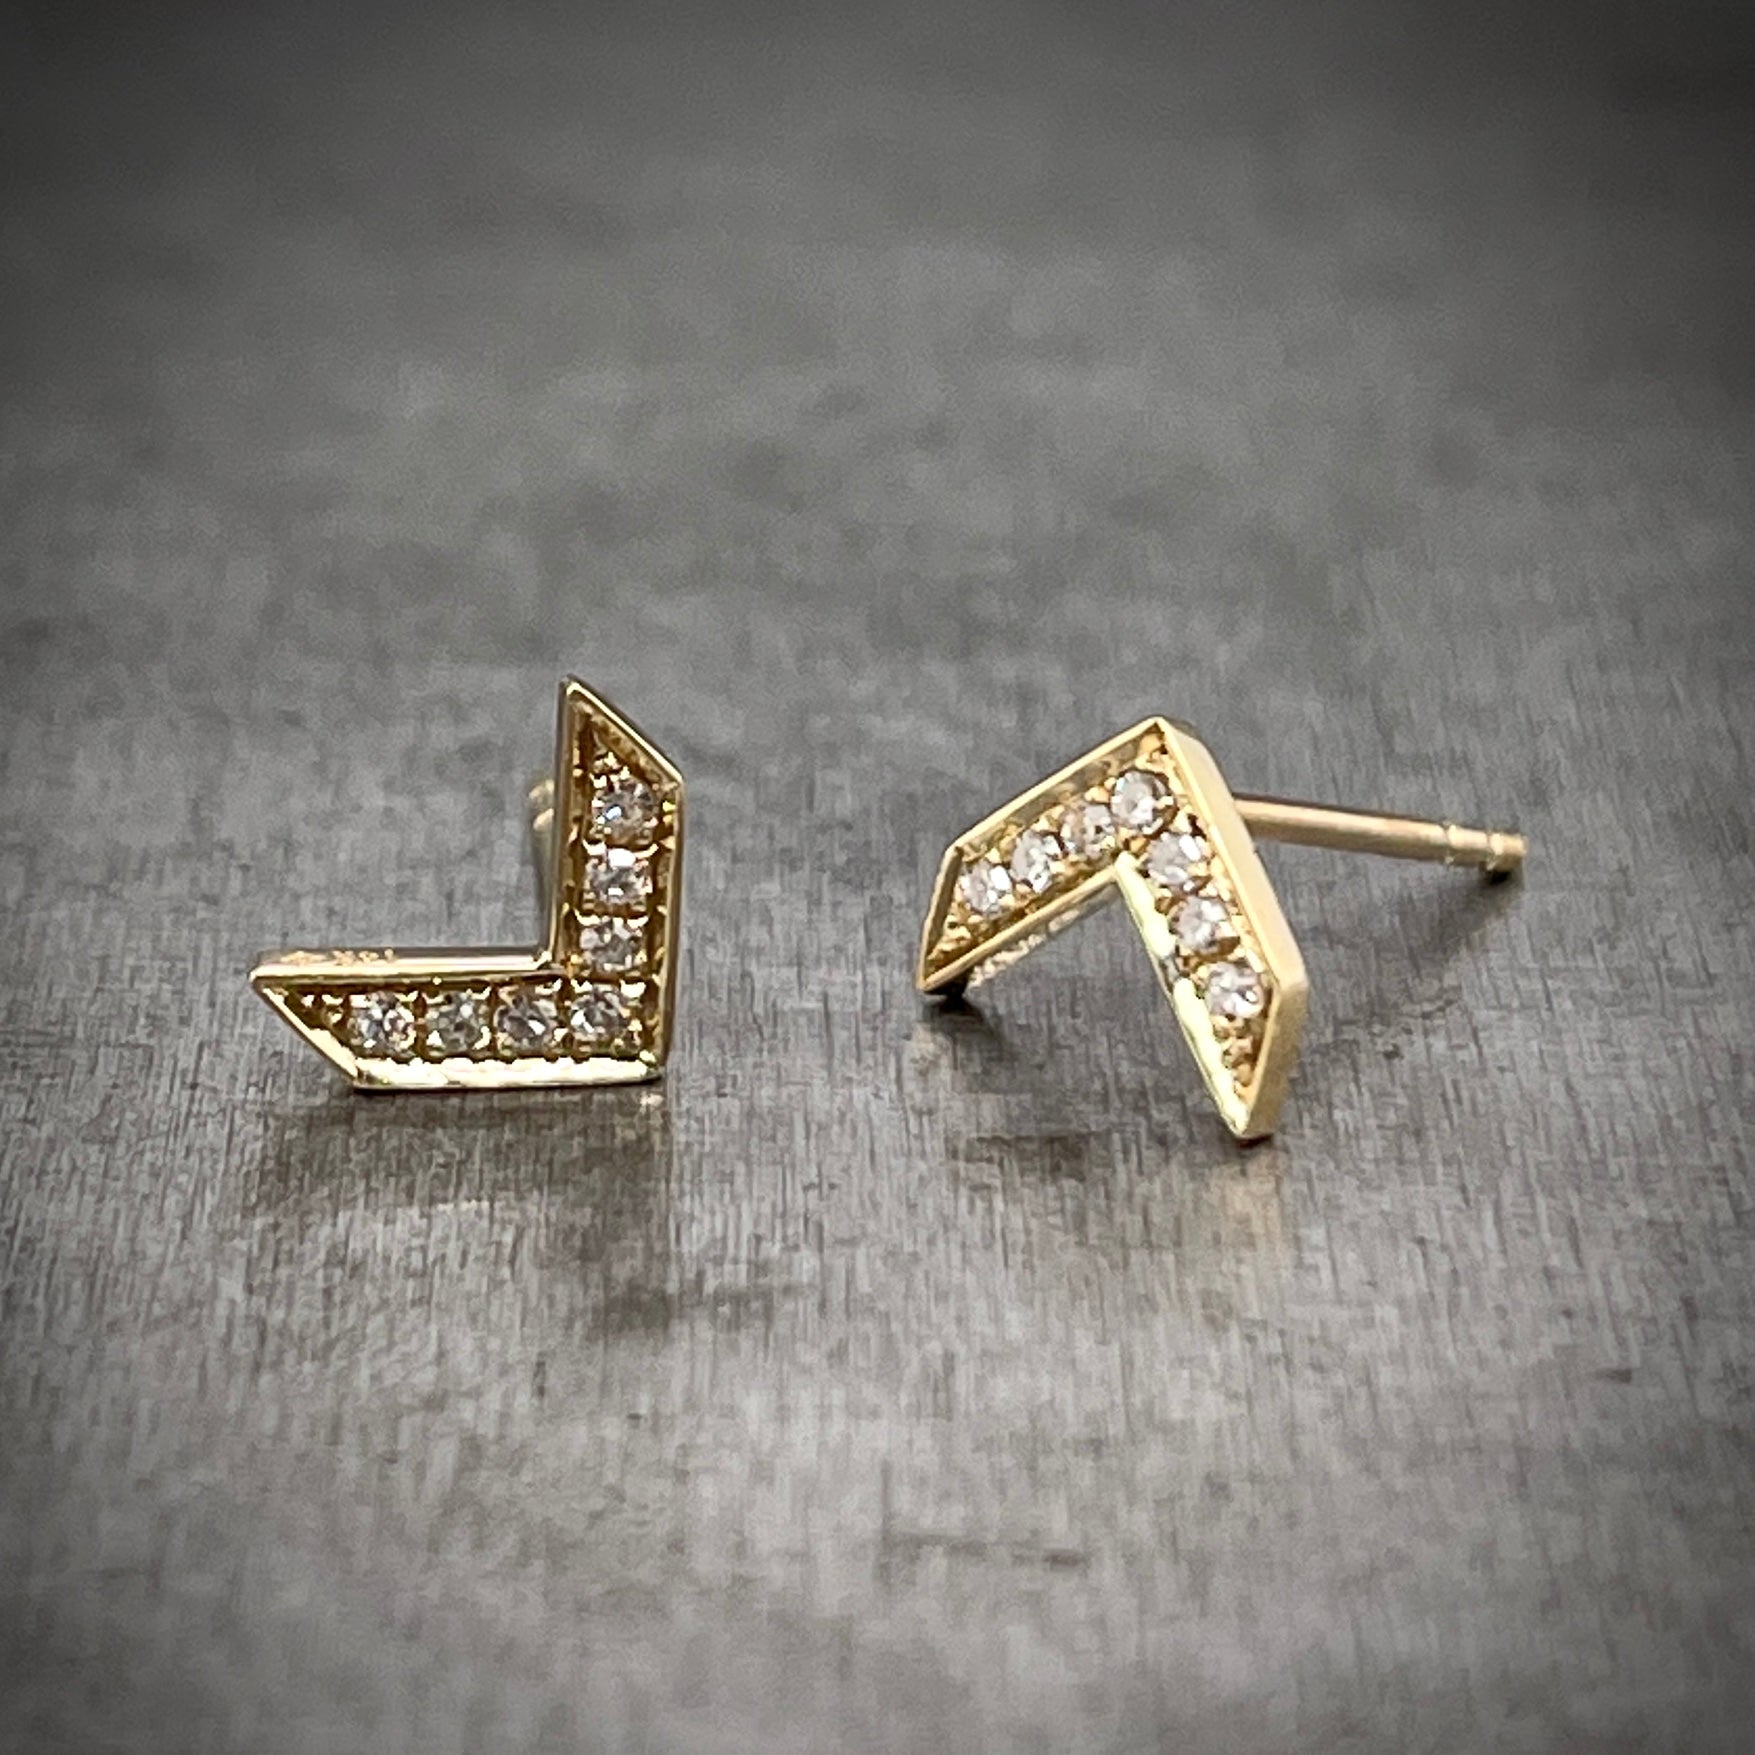 Full and 3/4 profile view of Gold and Diamond Arrow Earrings. The left stud is laying flat and the right is position in an upside-down "V" and angled partially so you can see the post of the stud.